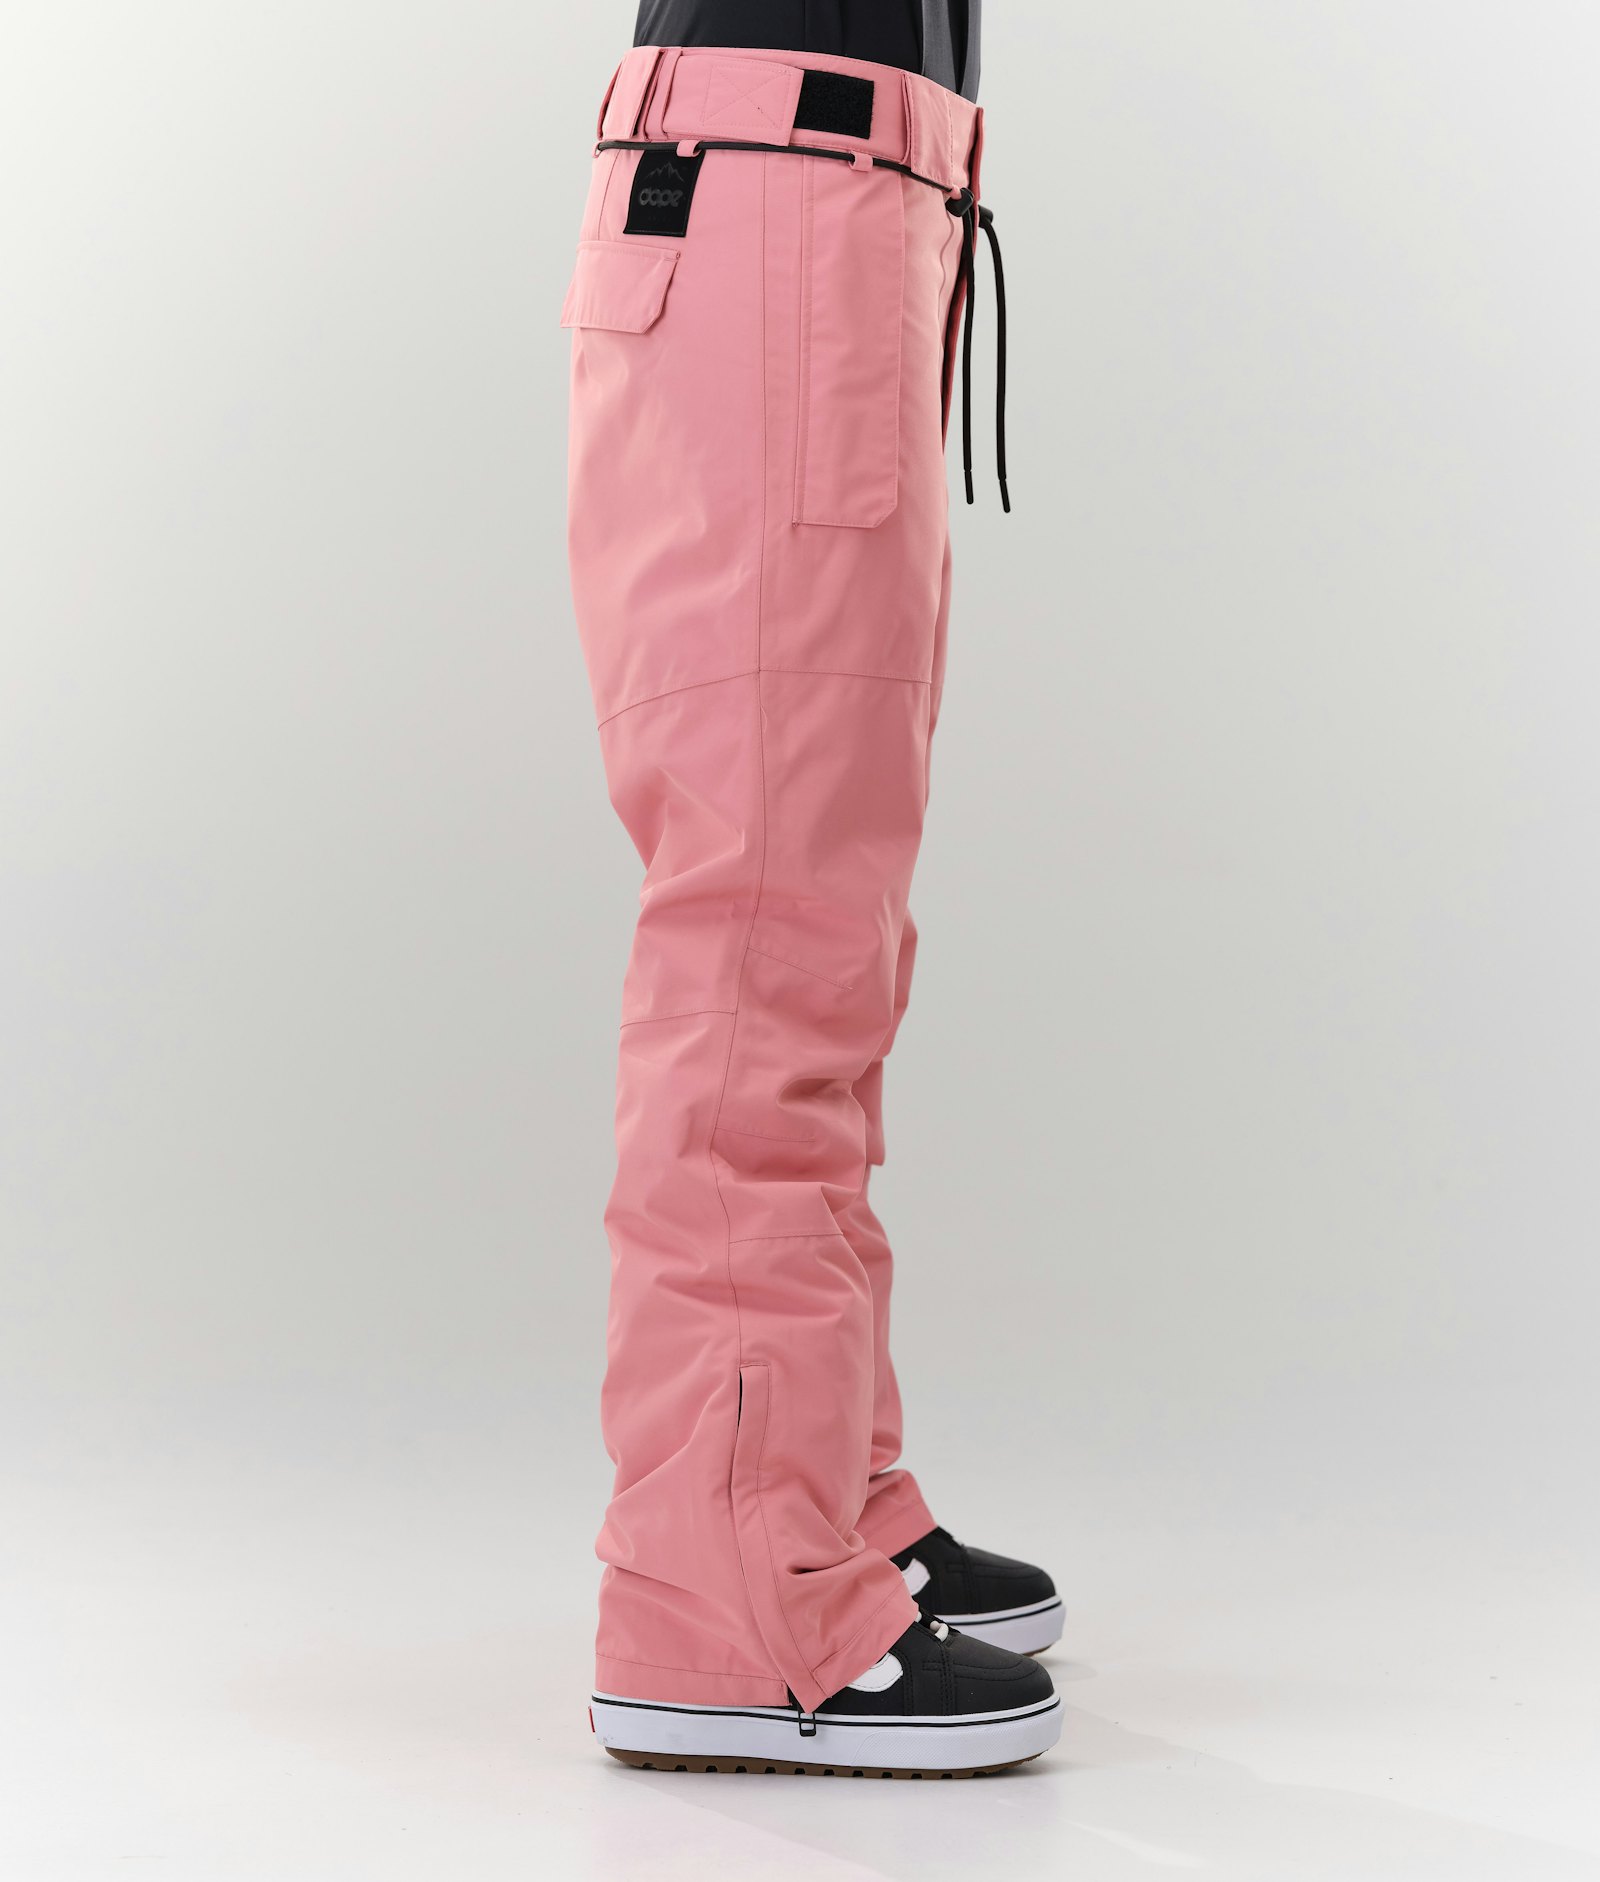 Iconic NP W Snowboard Pants Women Pink, Image 2 of 5